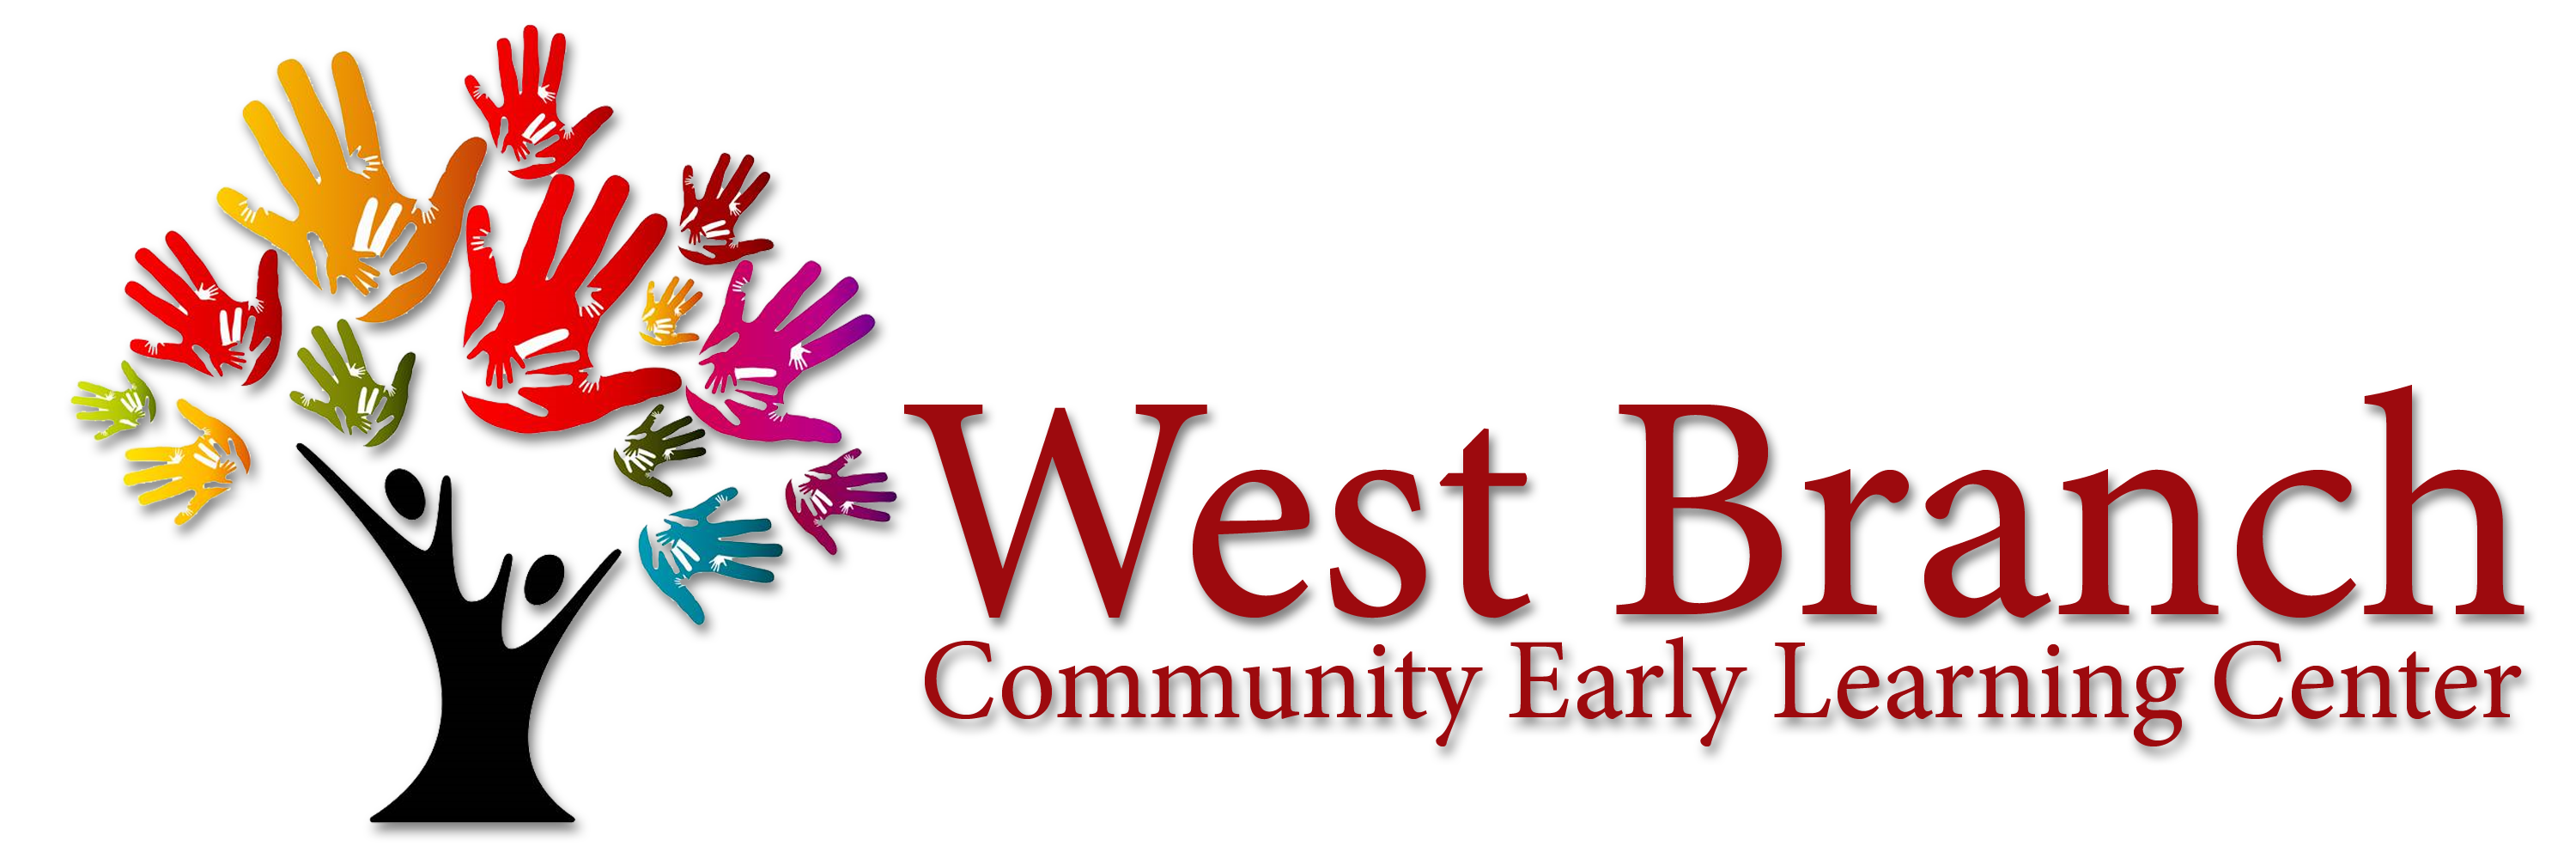 West Branch Community Early Learning Center